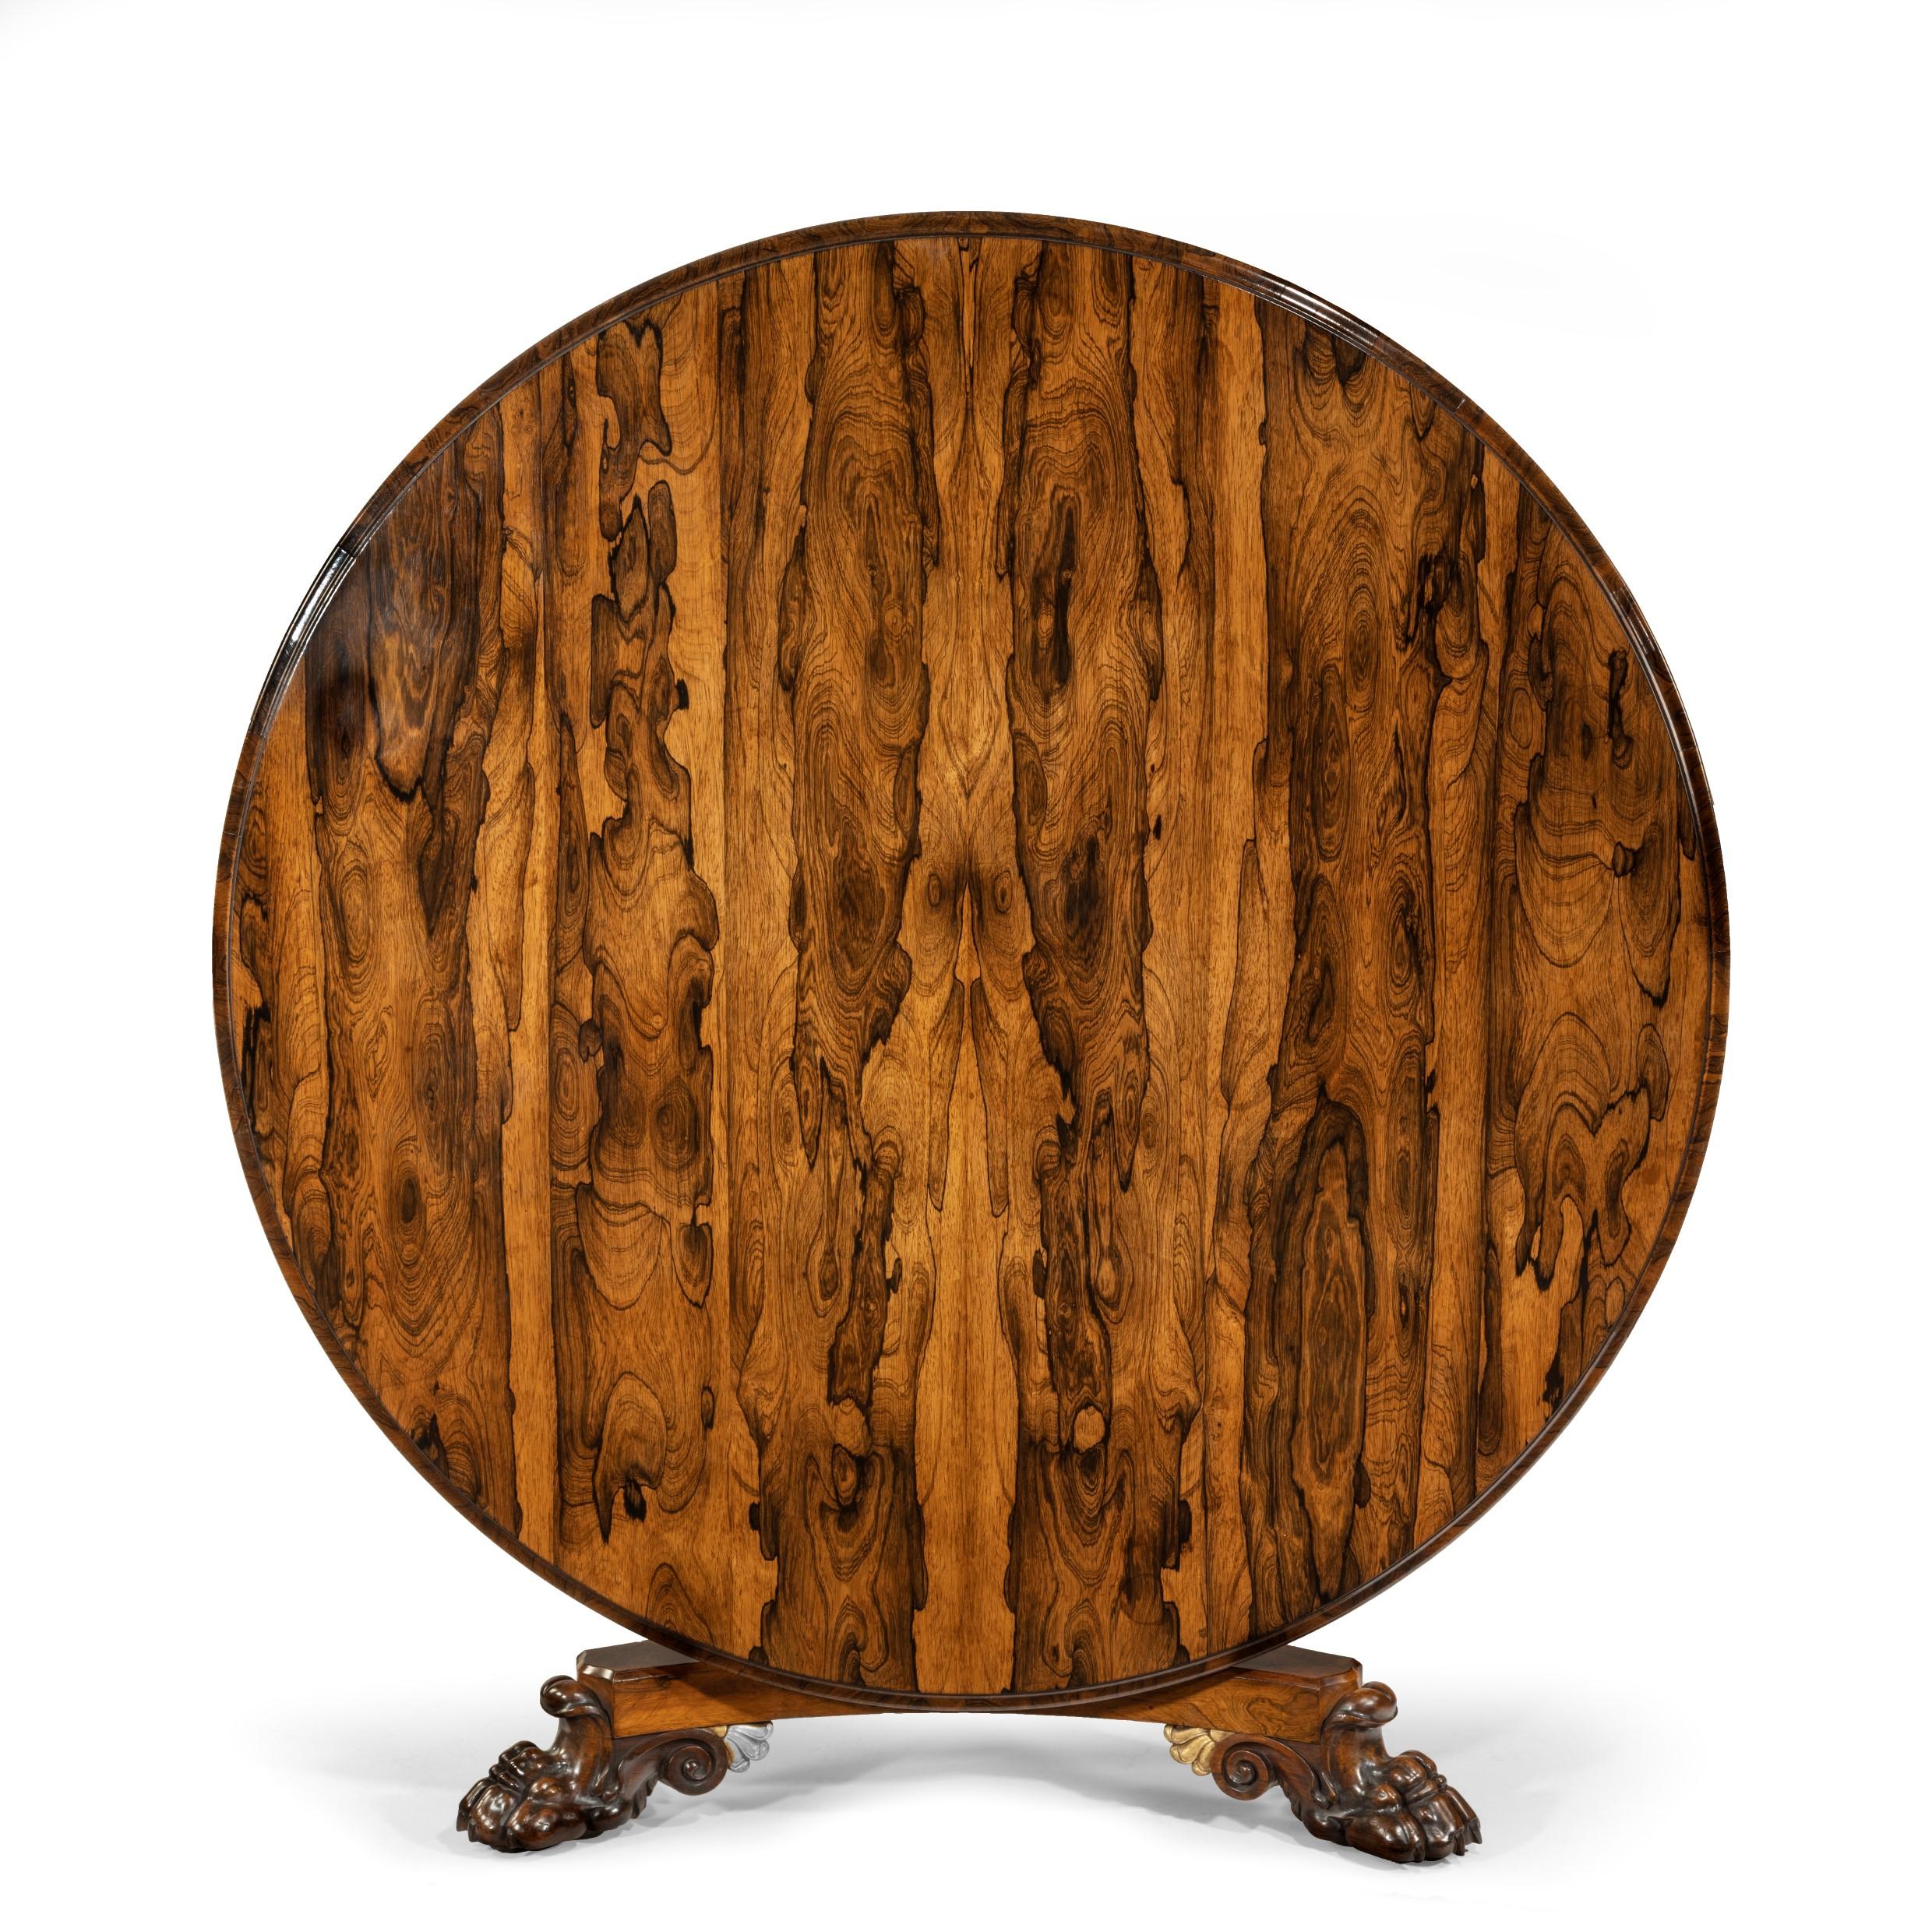 Regency Rosewood Five-Foot Tilt-Top Centre Table English, circa 1815 For Sale 2